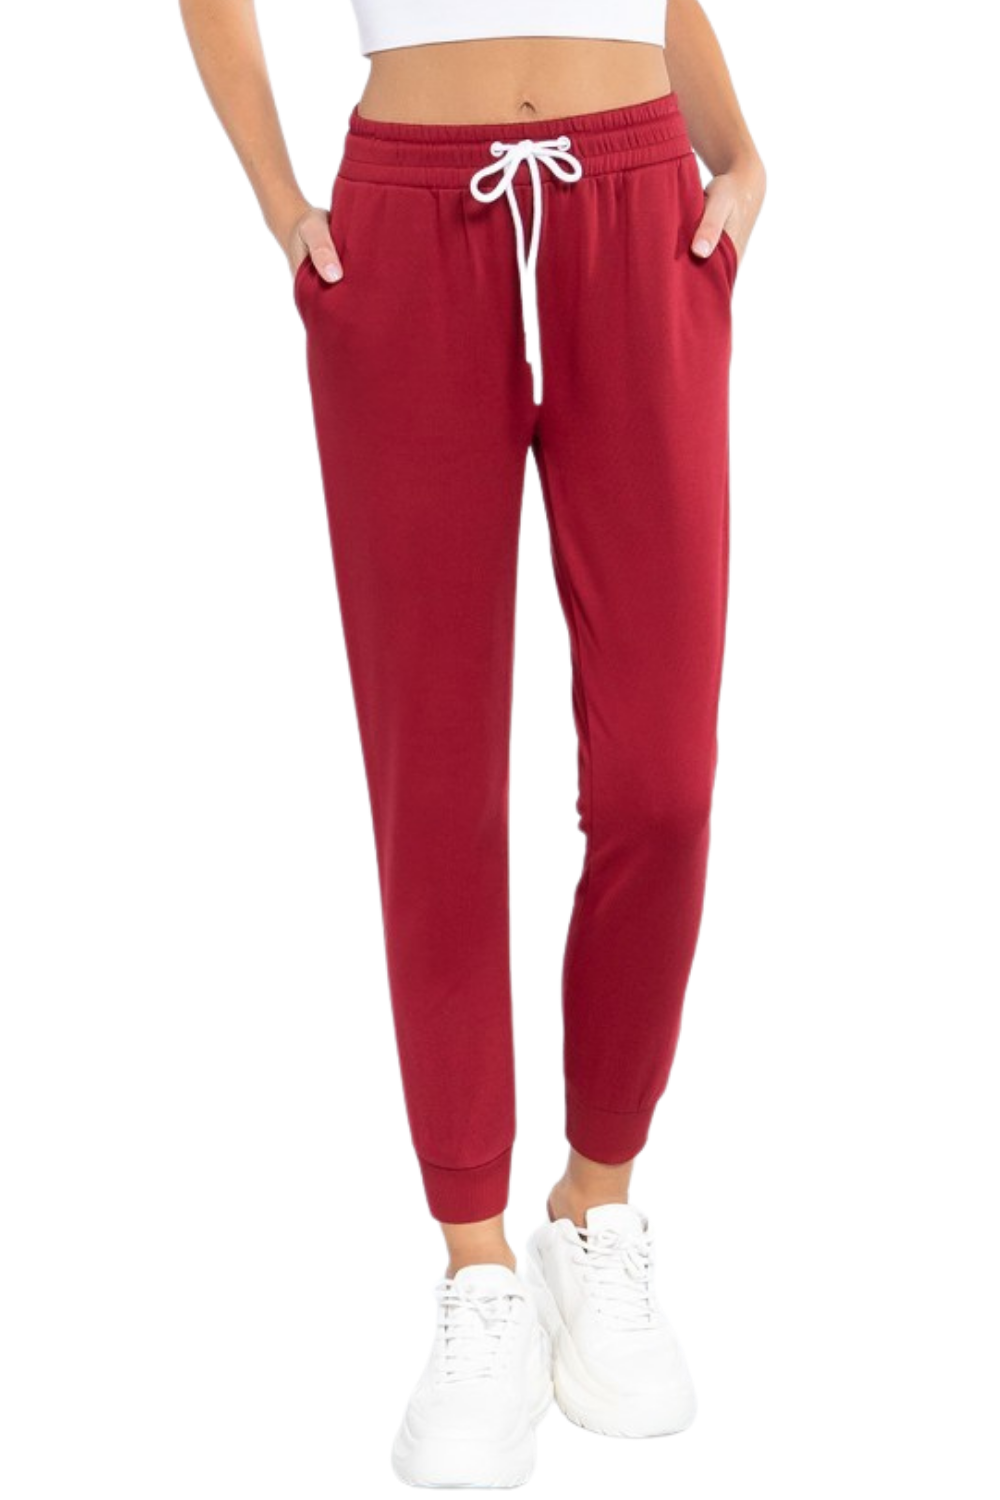 Chill Seeker Jogger - Vintage Red